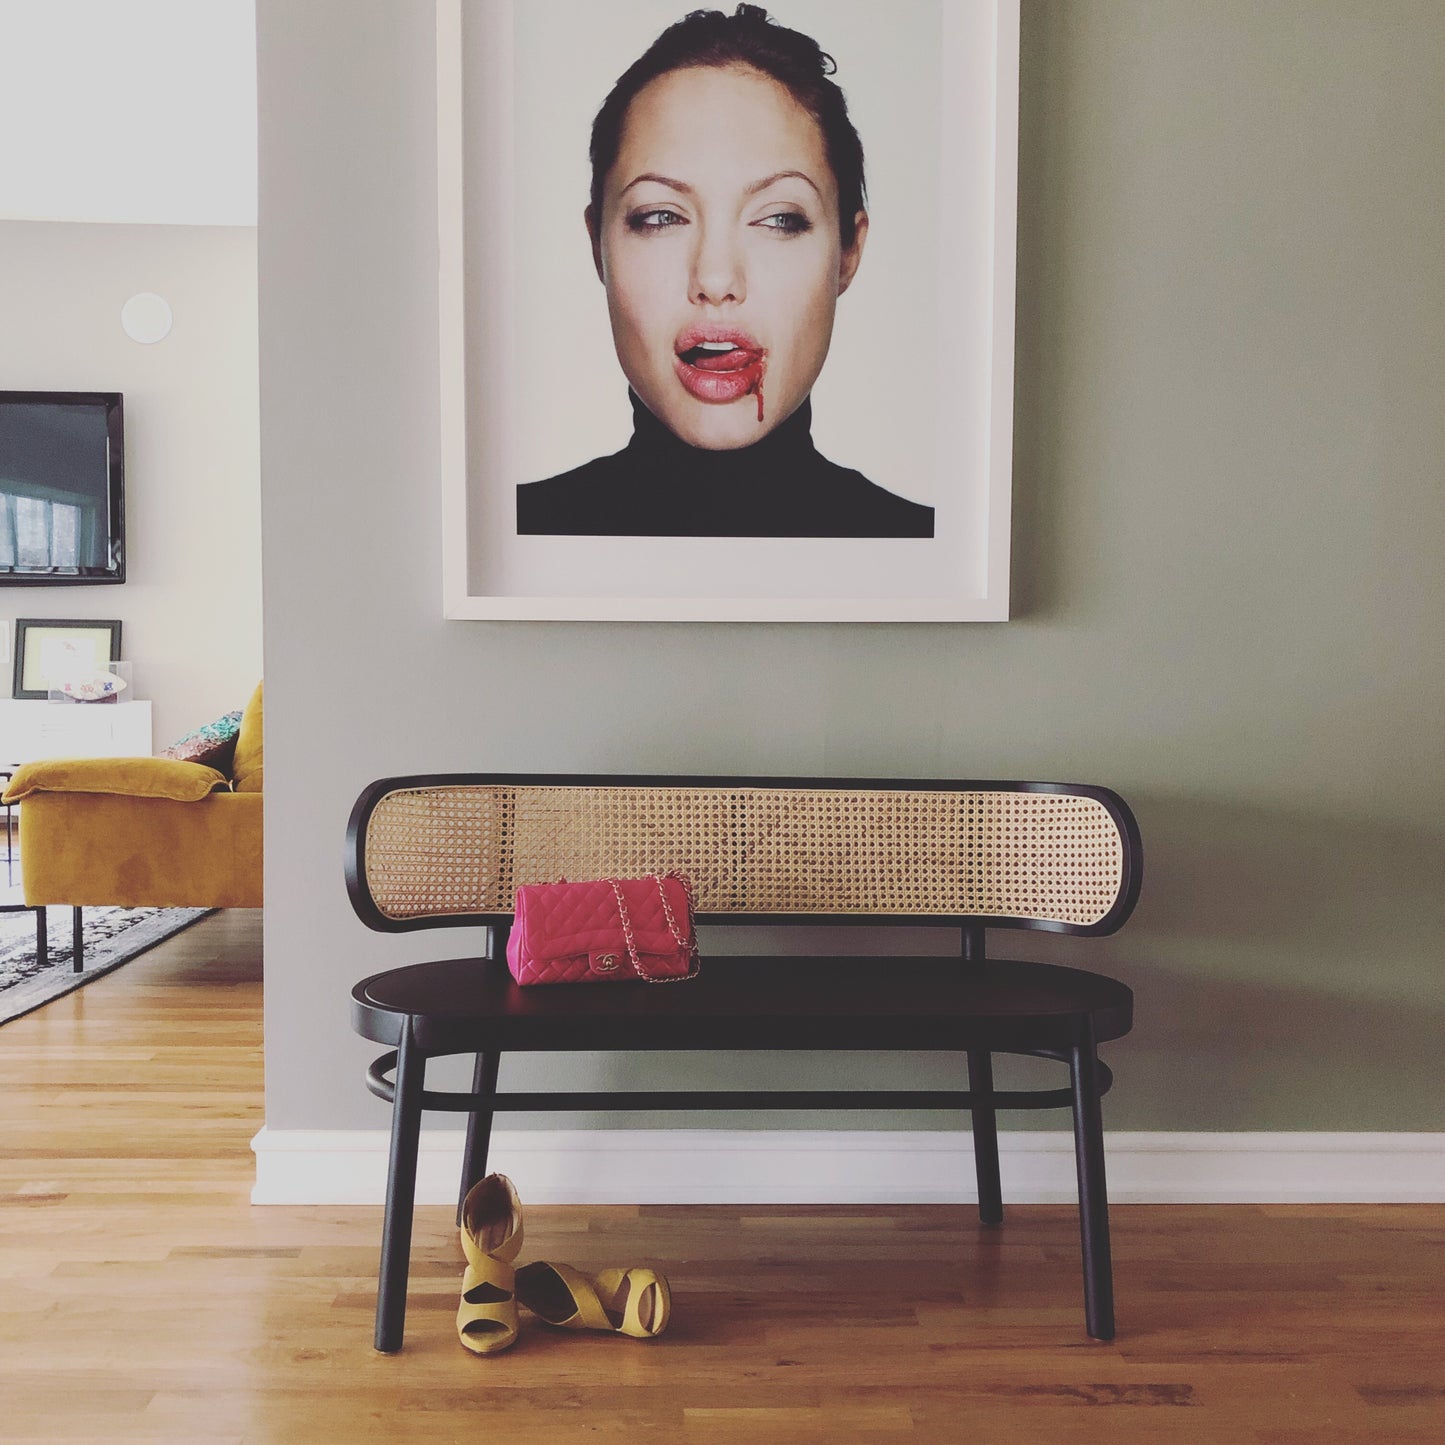 angelina jolie portrait with black hk living usa cane webbing bench and pink chanel bag